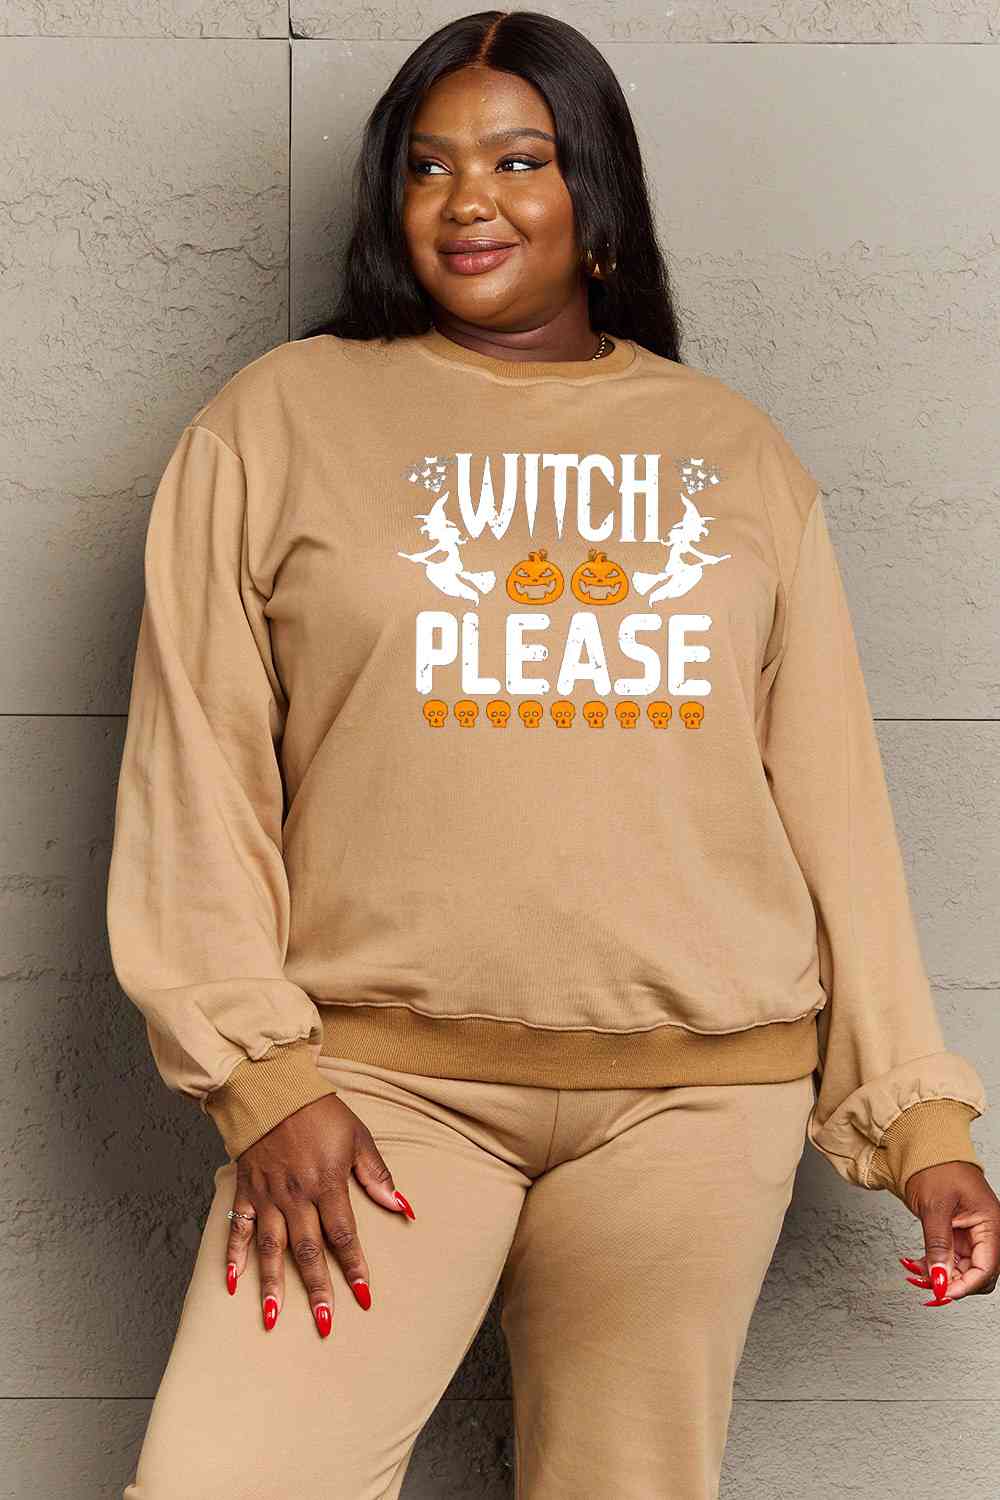 Simply Love Full Size WITCH PLEASE Graphic Sweatshirt, MyriadMart